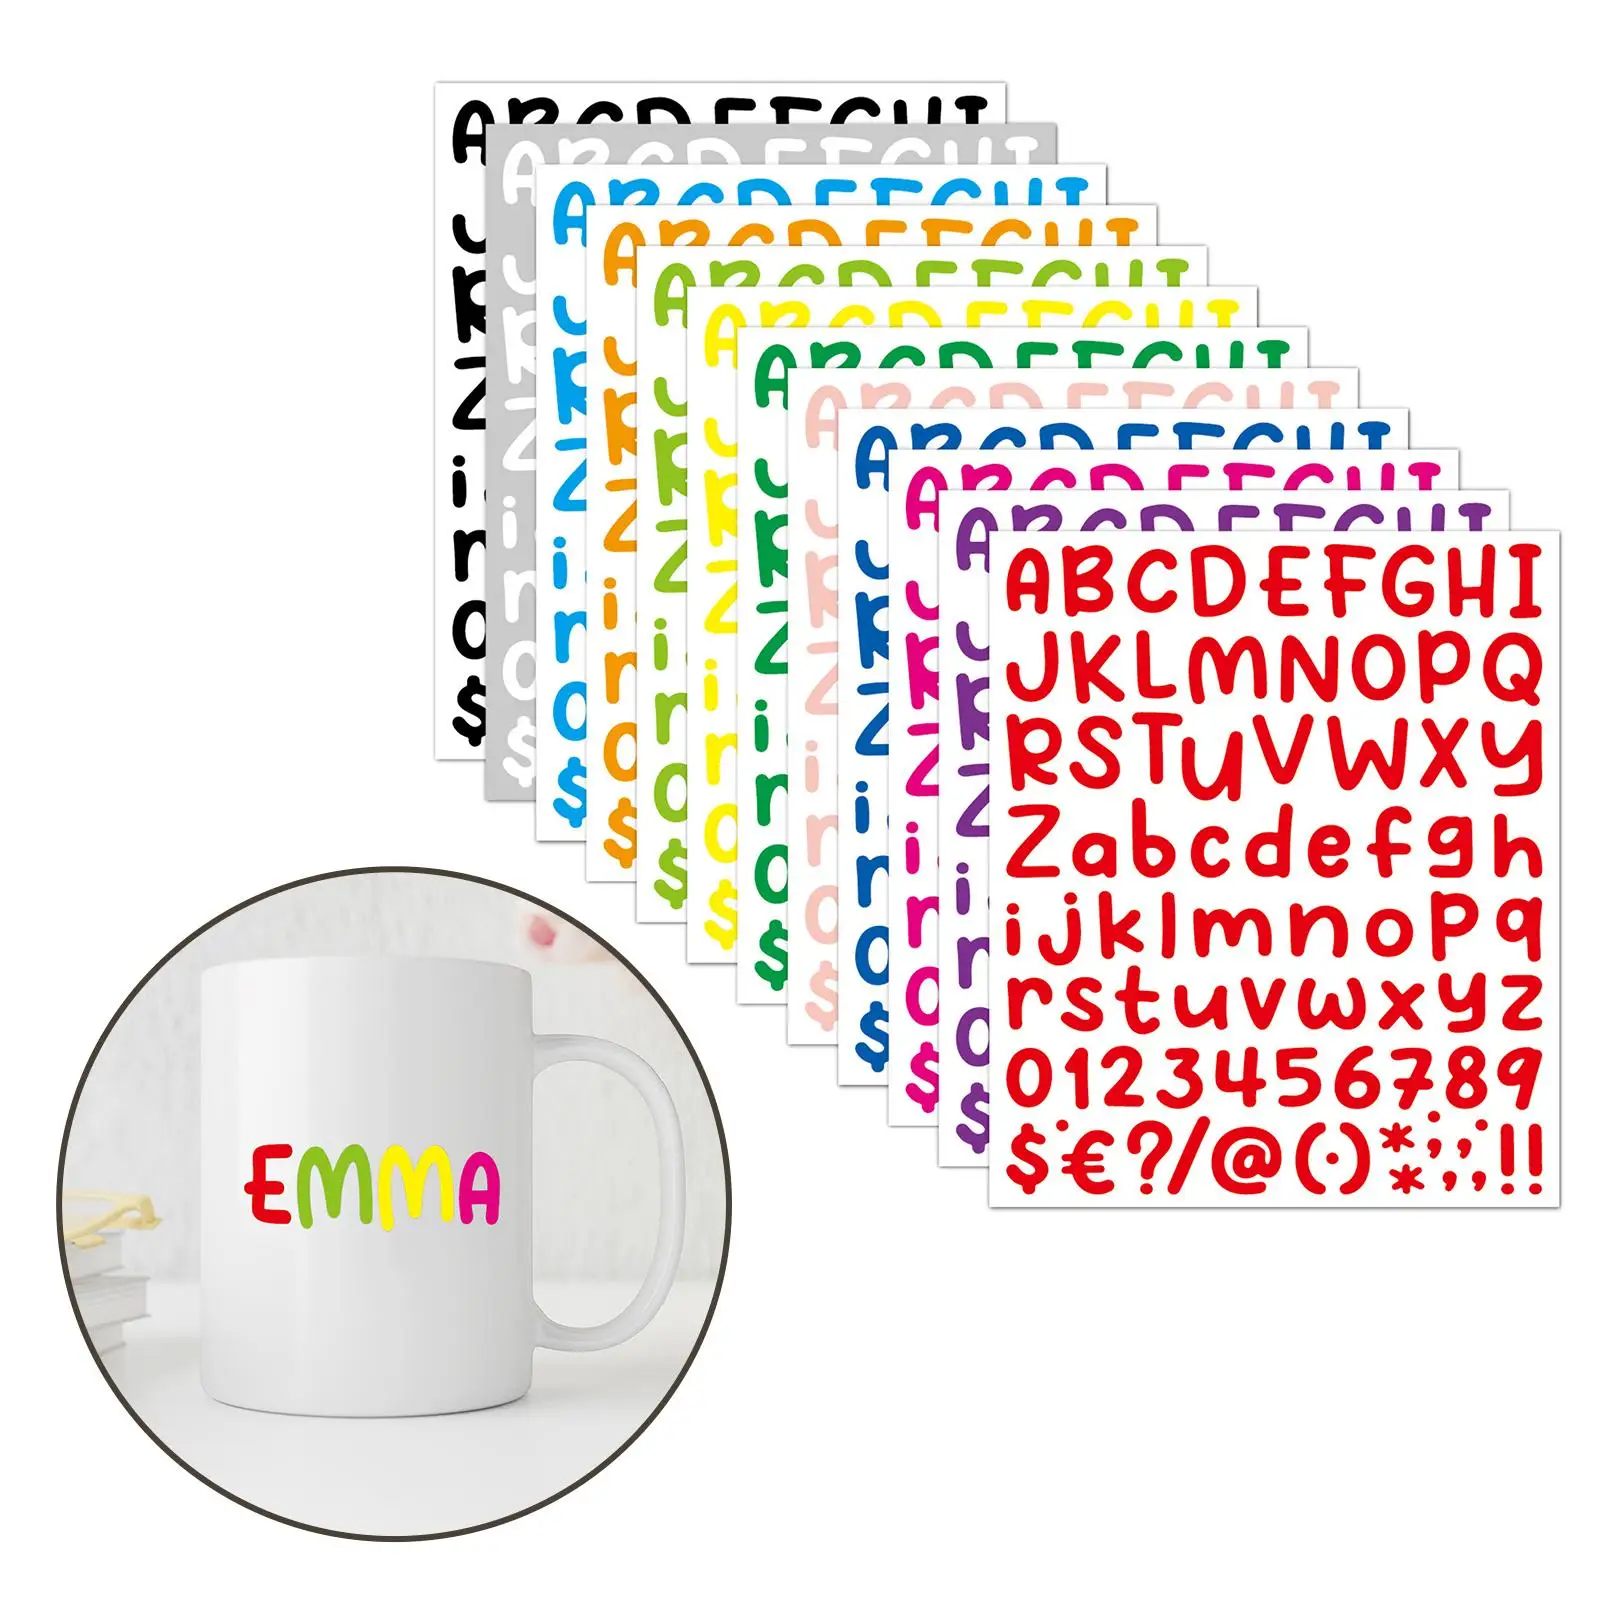 12Pcs Alphabet Letter Stickers 1 inch Self Adhesive Colorful Vinyl Letter Stickers for Gift Wrapping Mailbox Business